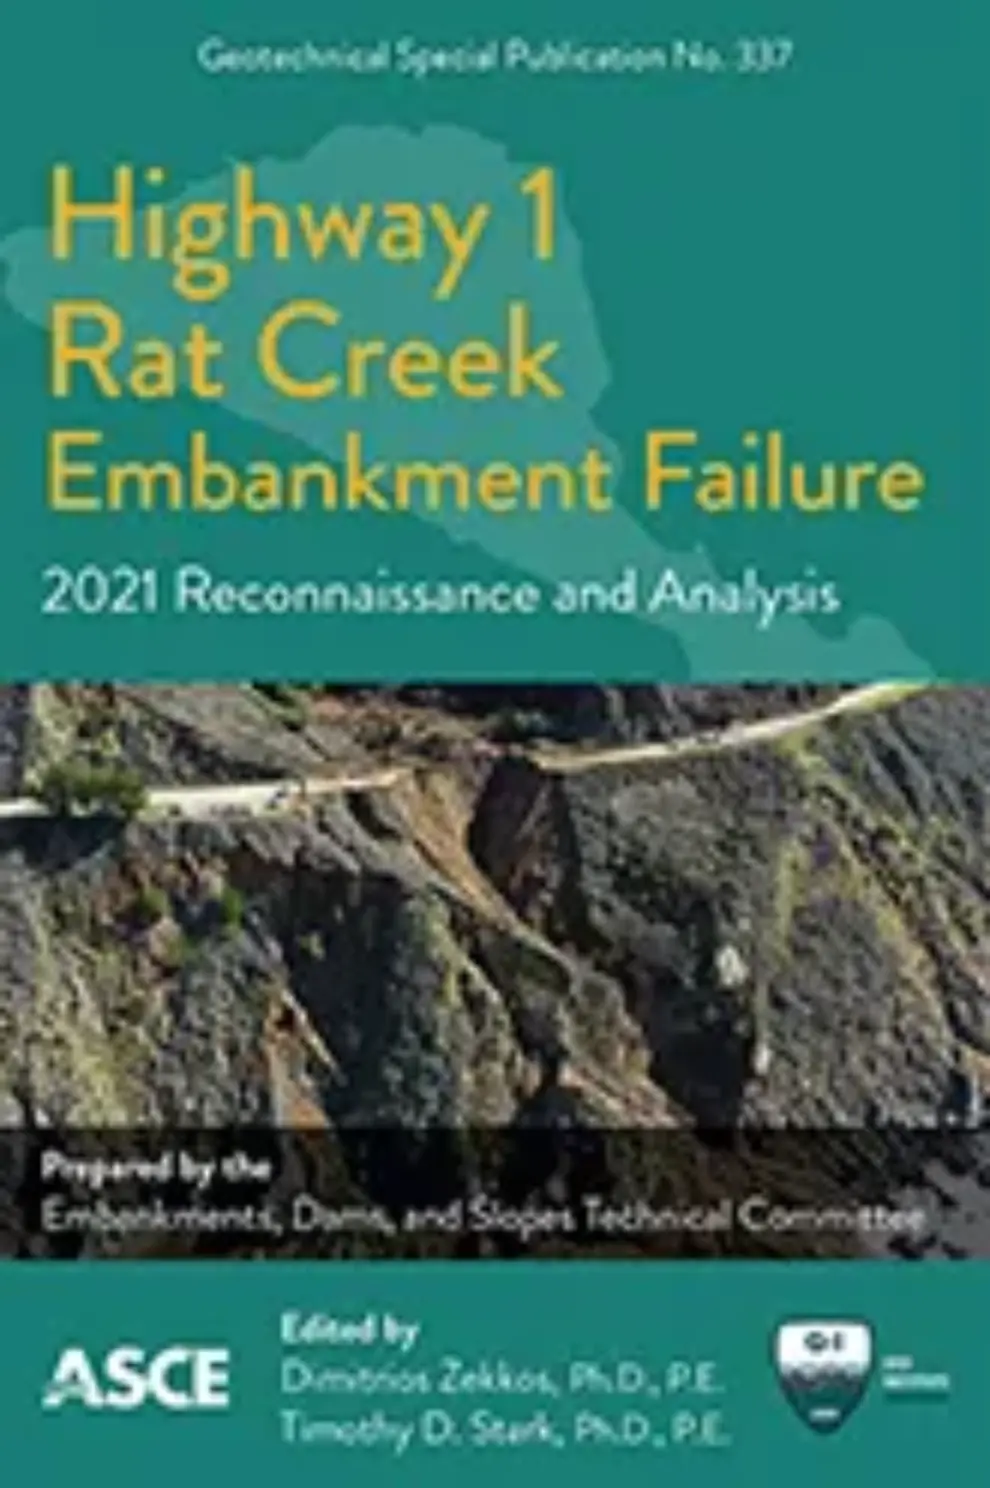 <a><strong>New ASCE Publication</strong></a><strong> Analyzes Recent Embankment Failure in Northern California</strong>